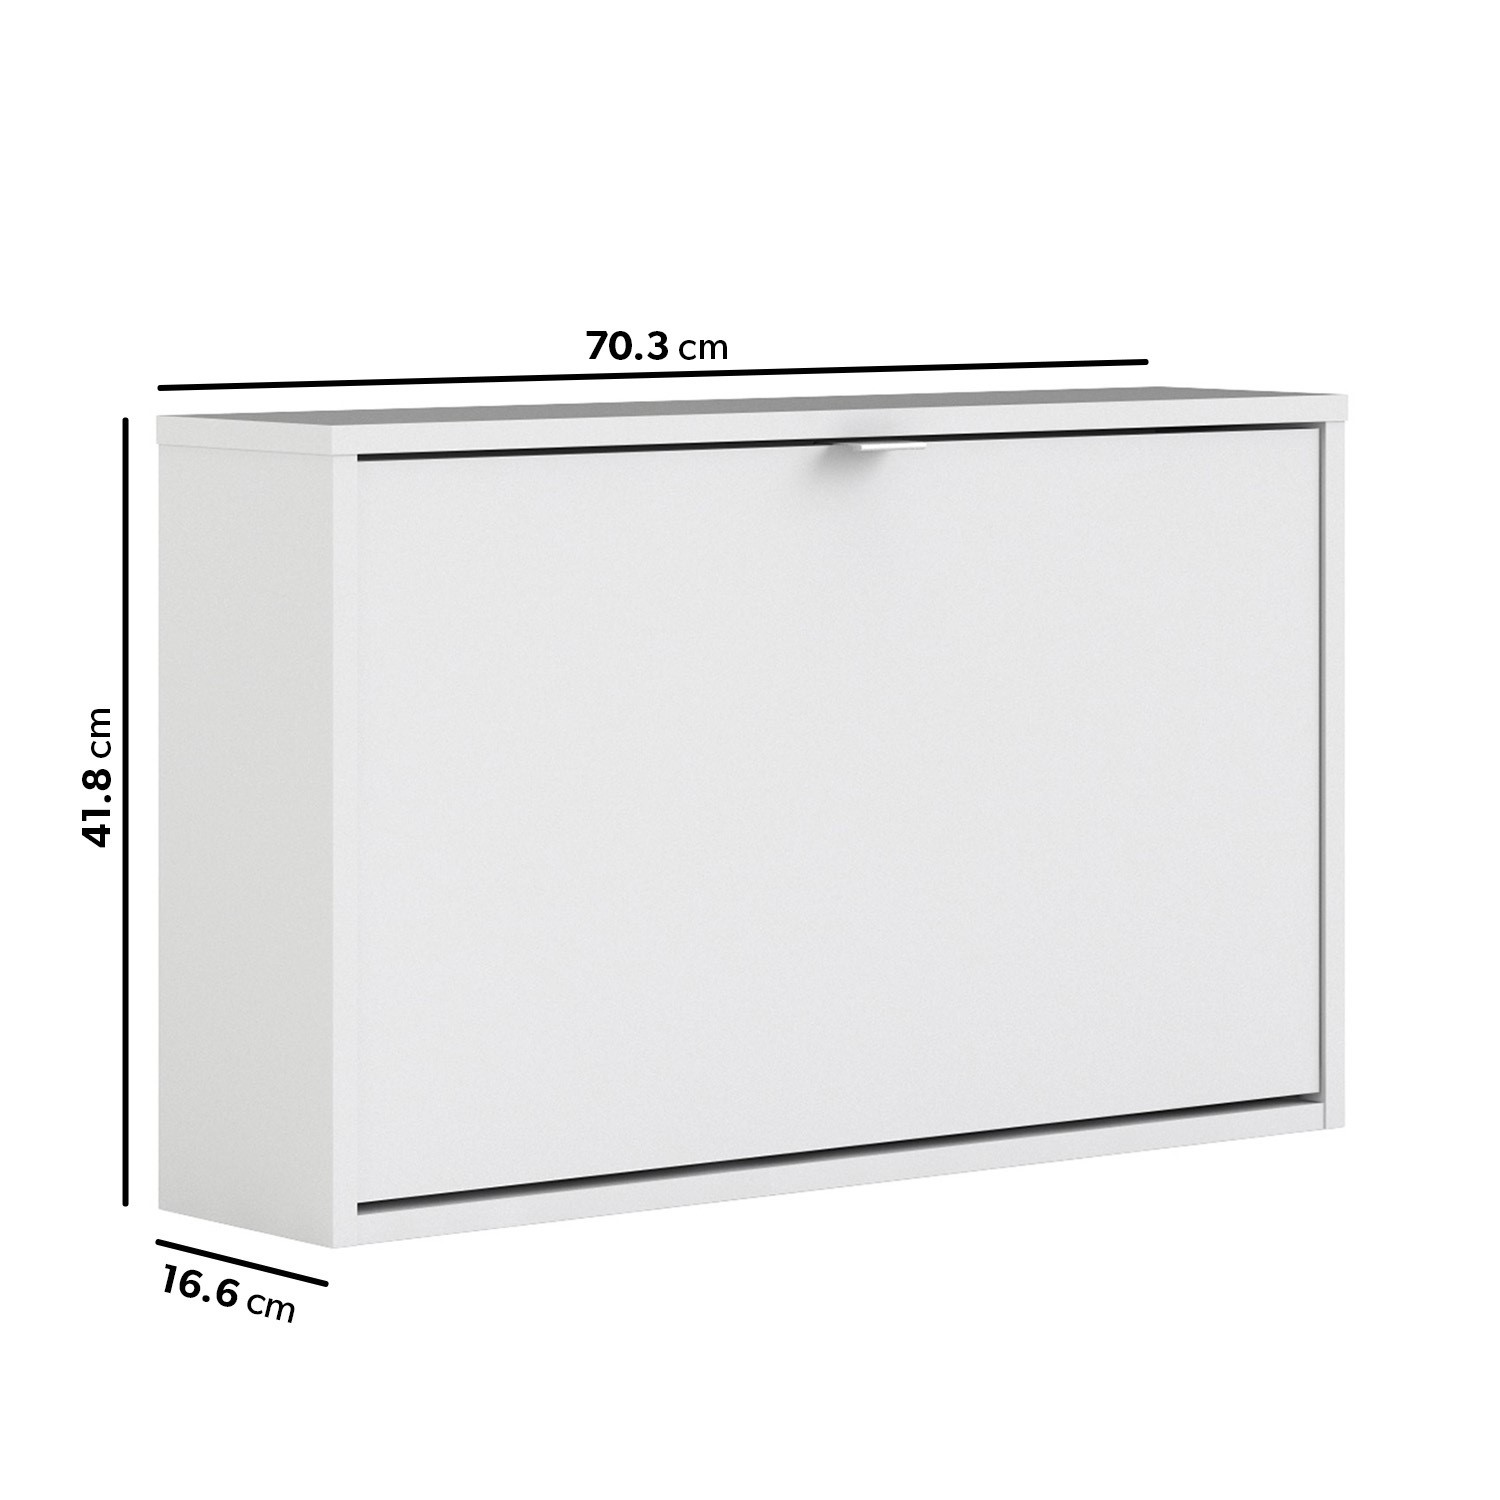 Read more about Slim white wall hung shoe cabinet 3 pairs